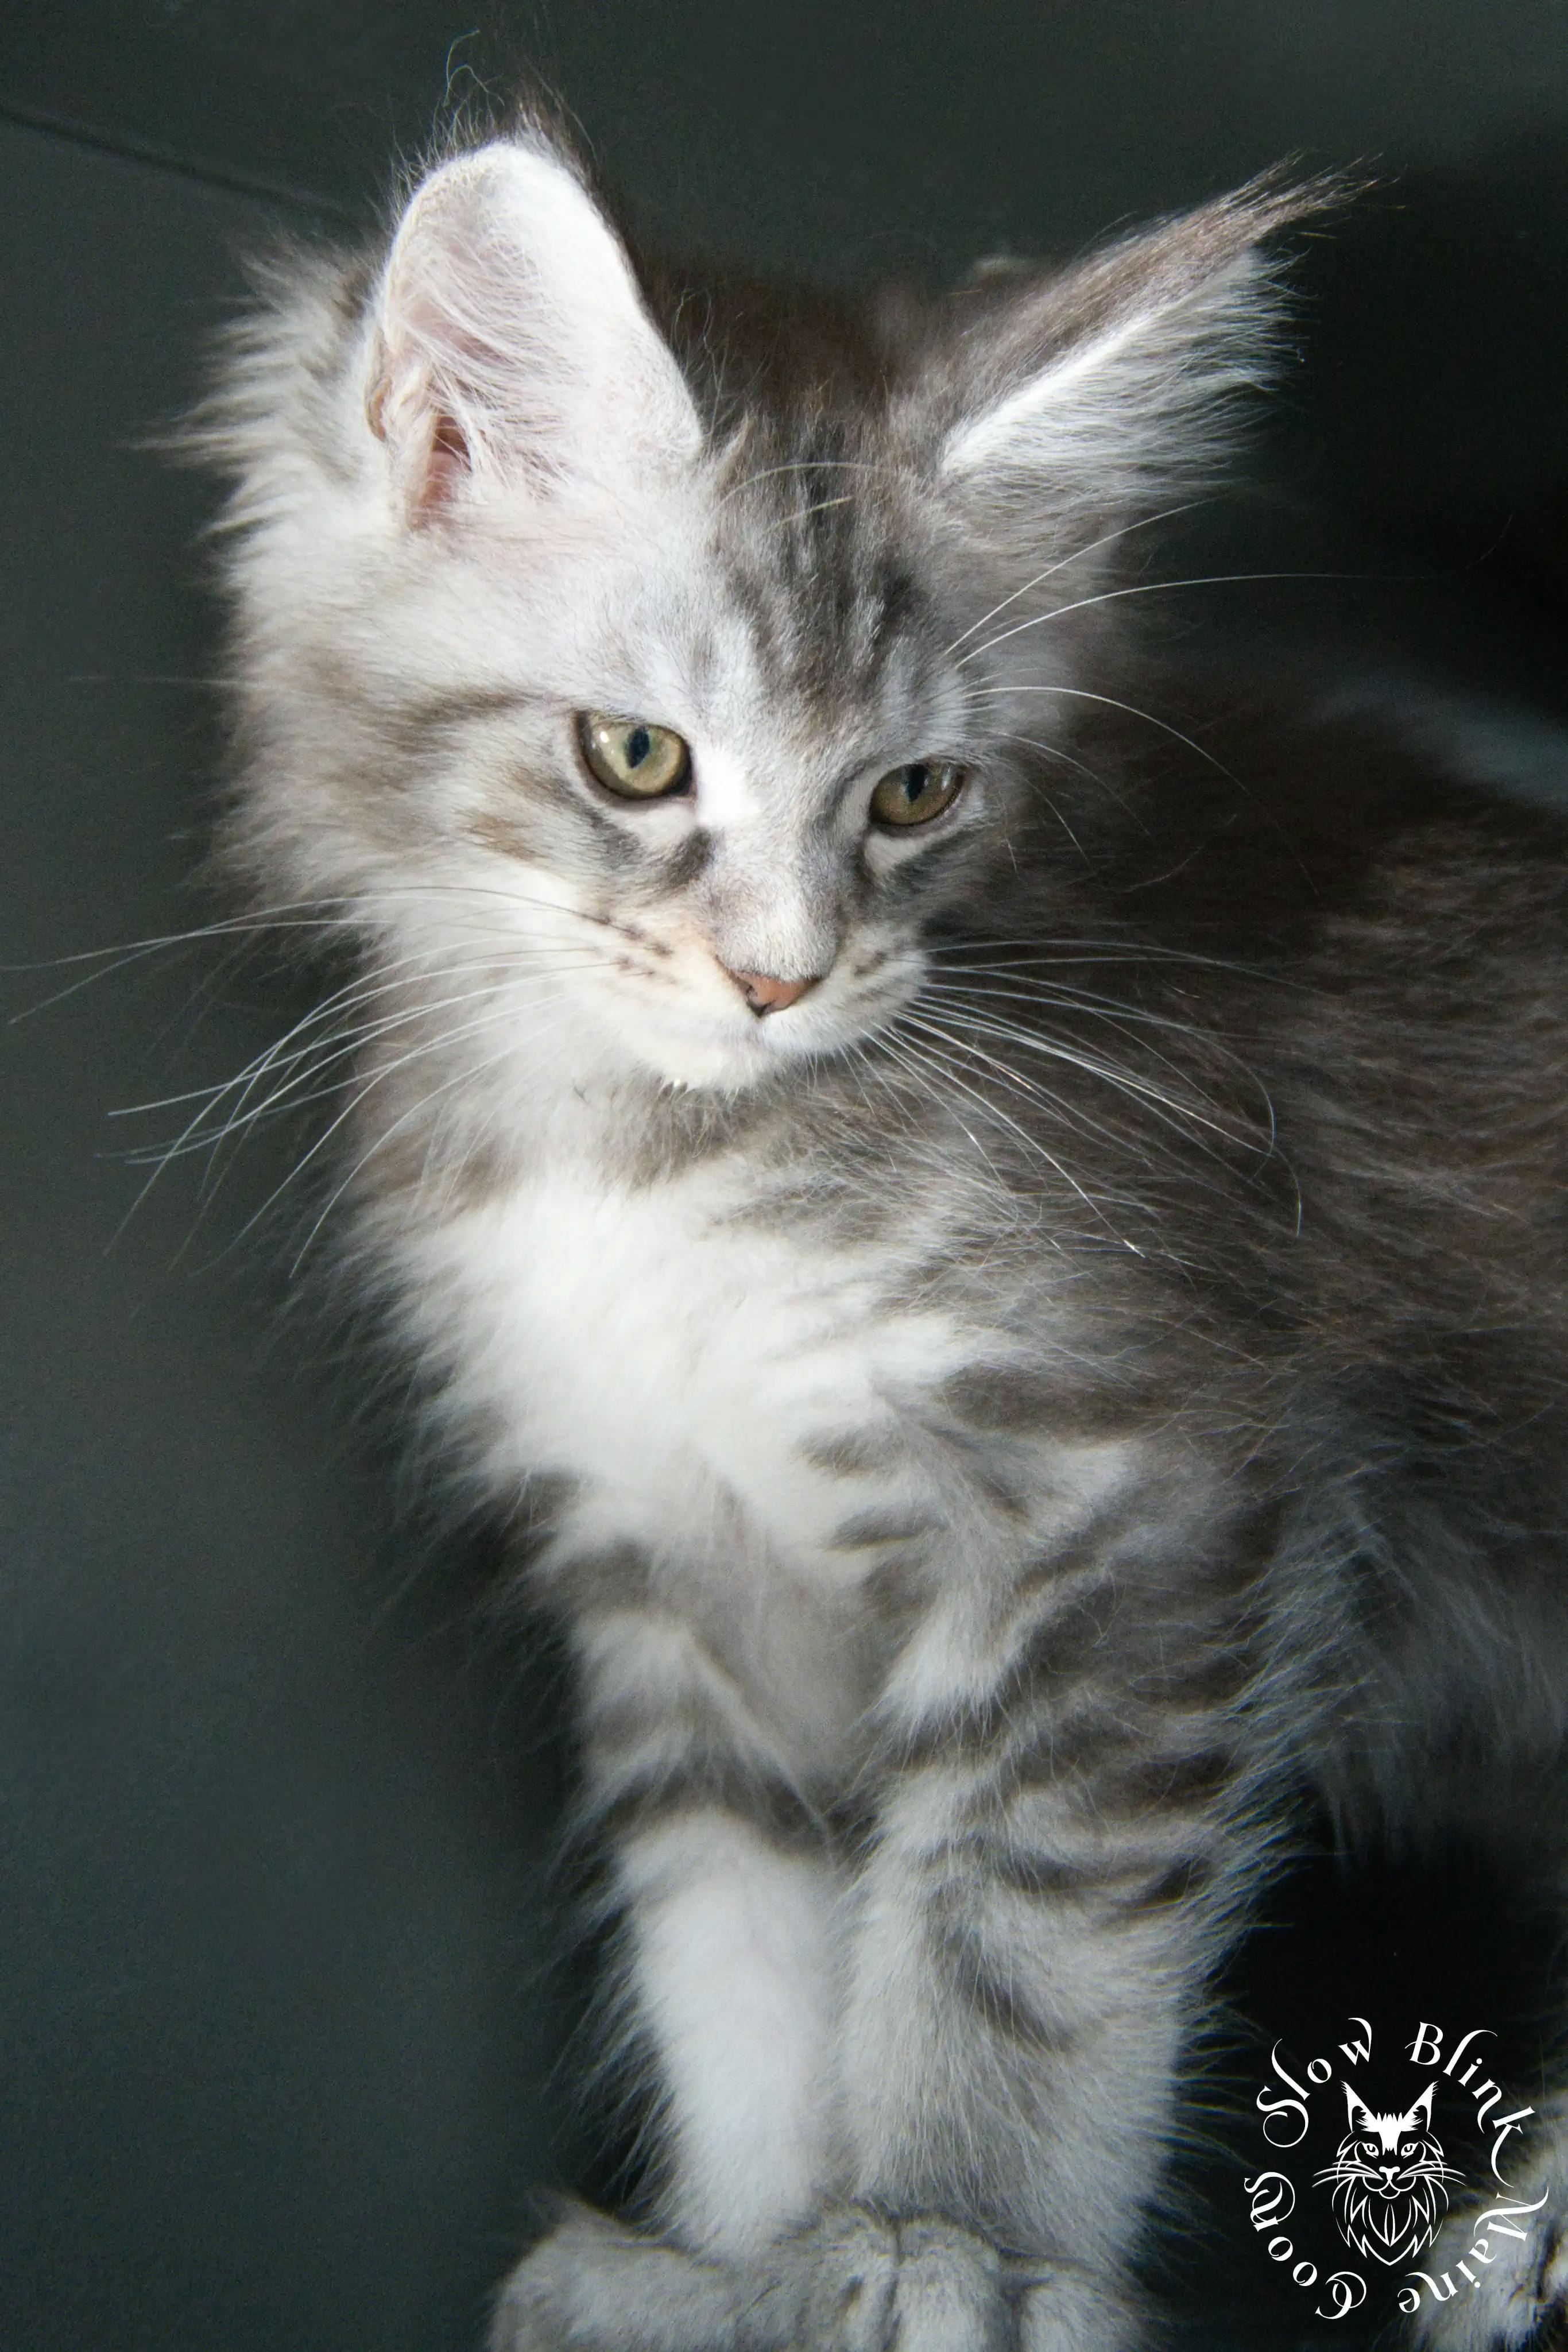 Blue Silver Tabby Maine Coon Kittens > blue silver tabby maine coon kitten | slowblinkmainecoons | 524